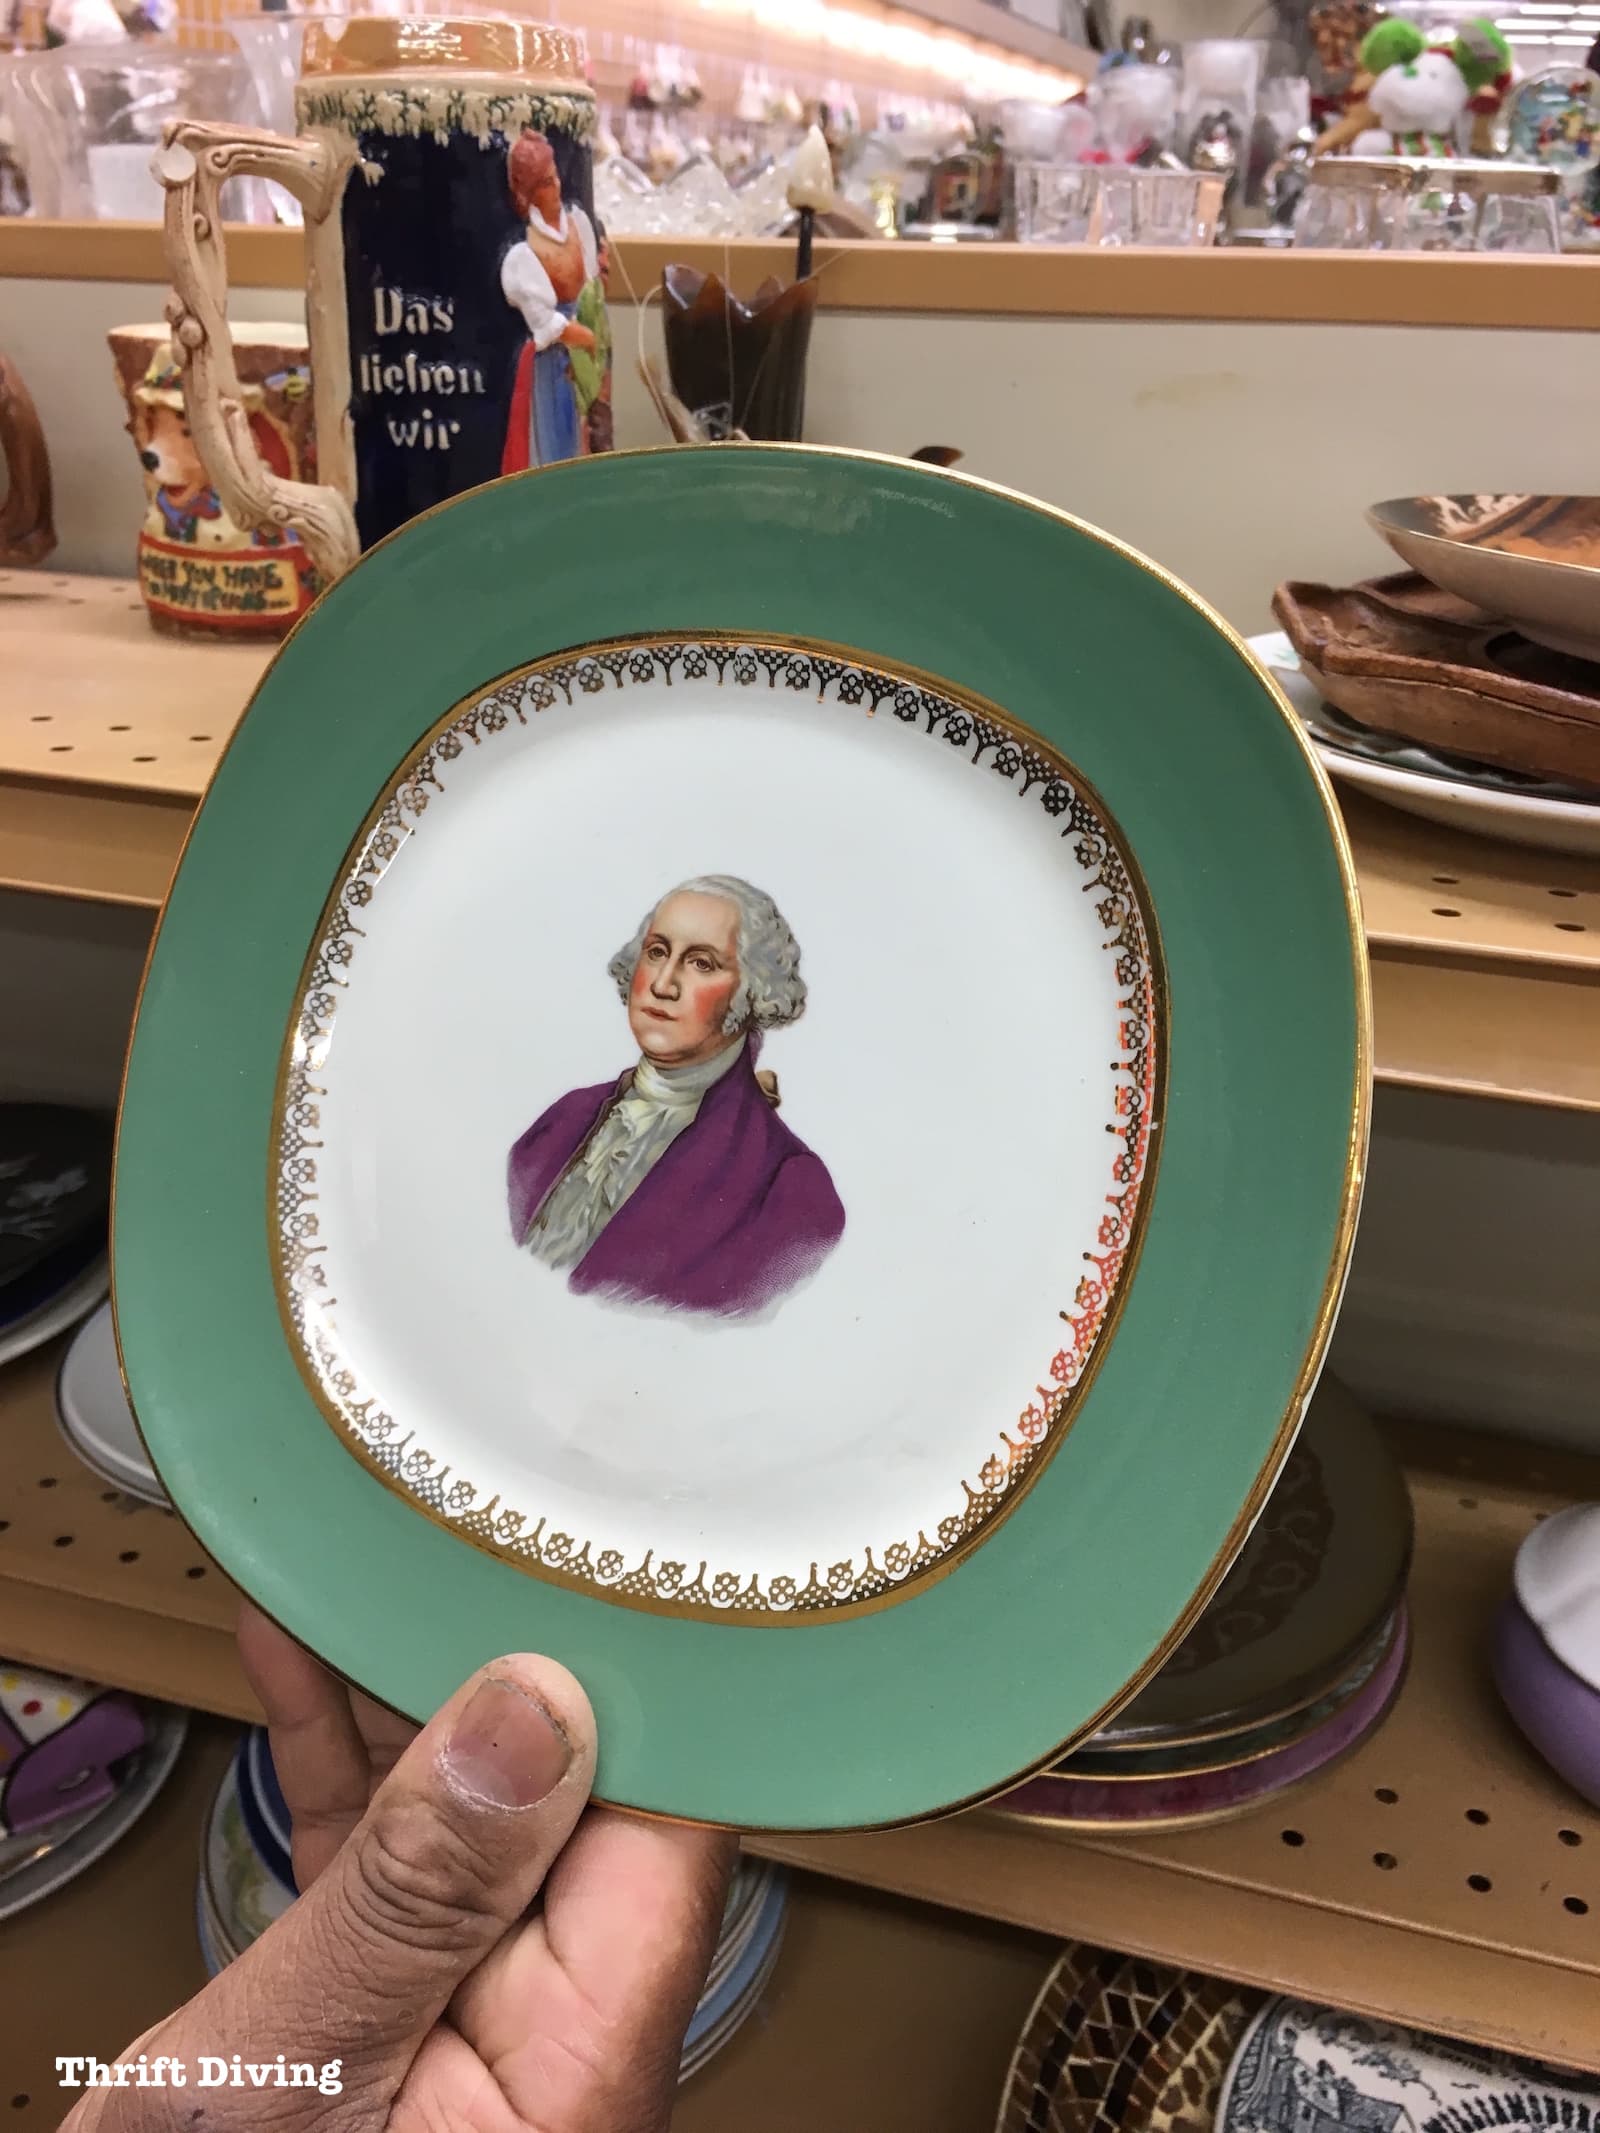 How to Shop Thrift Stores - Presidential plate. - Thrift Diving